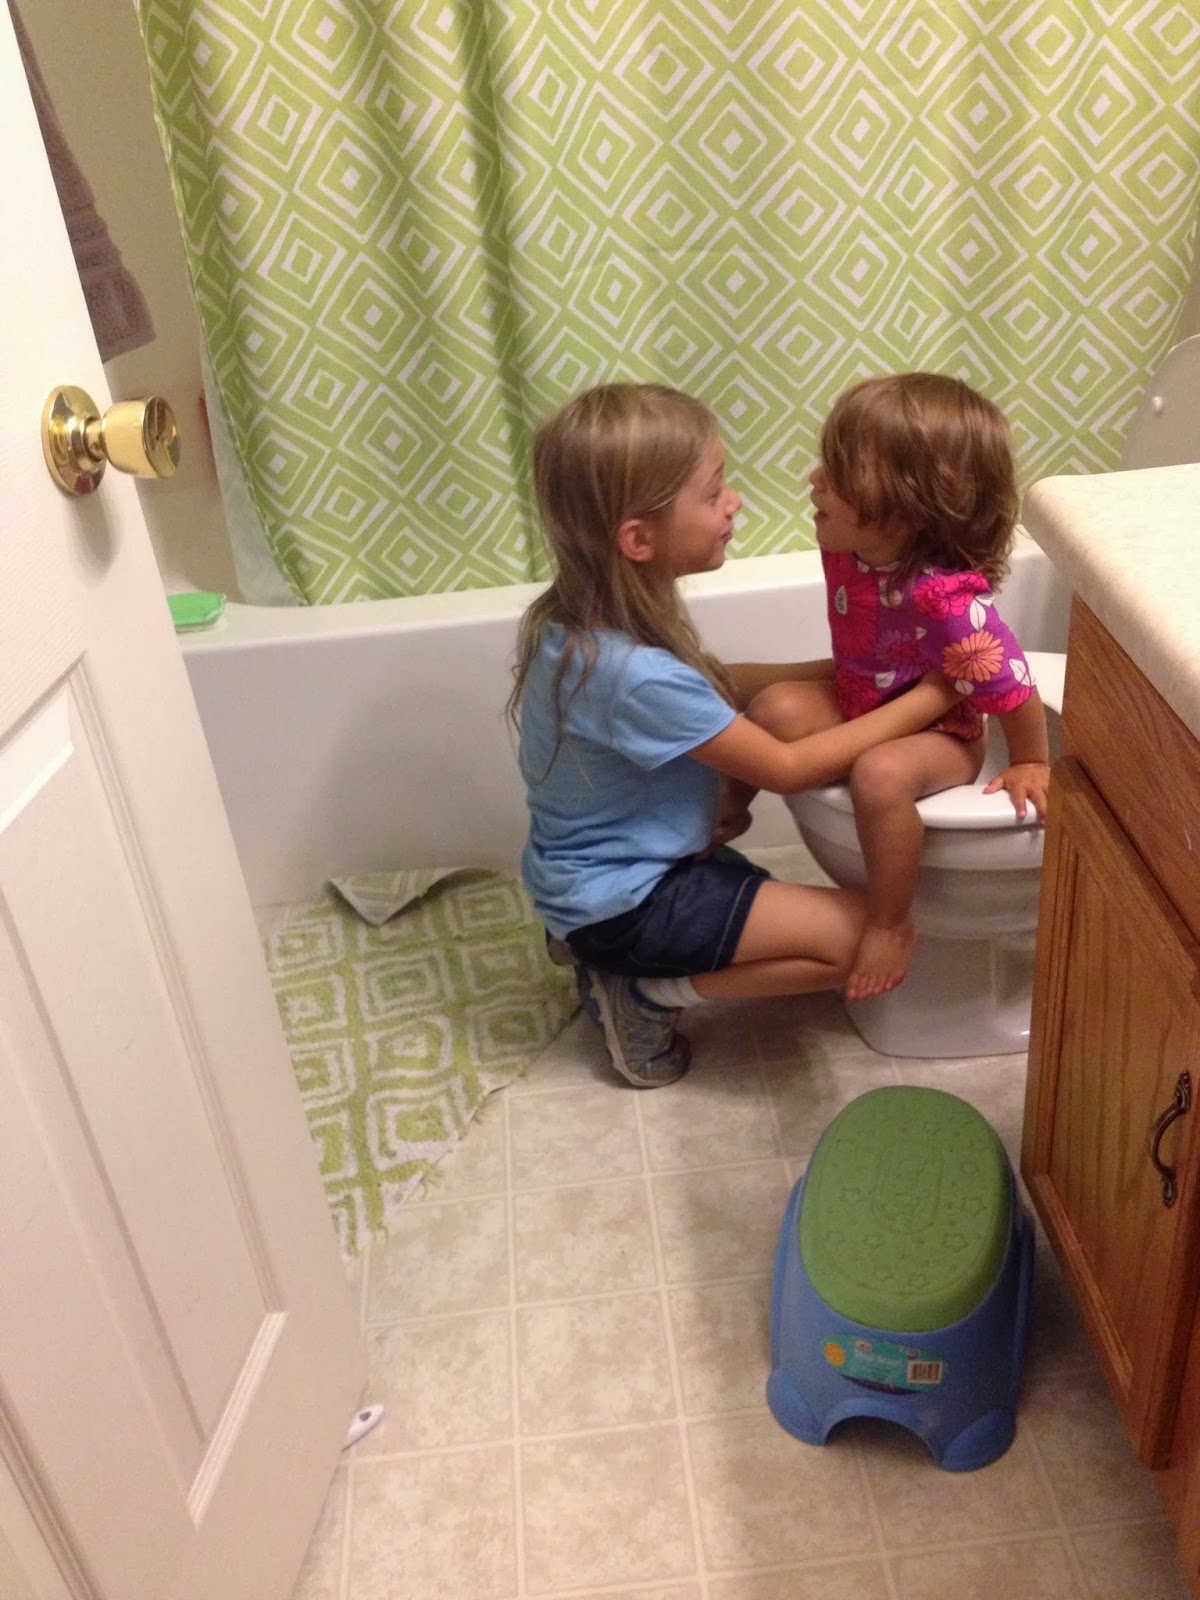 Diary of a Doctors Wife: We Are Back To Potty Training